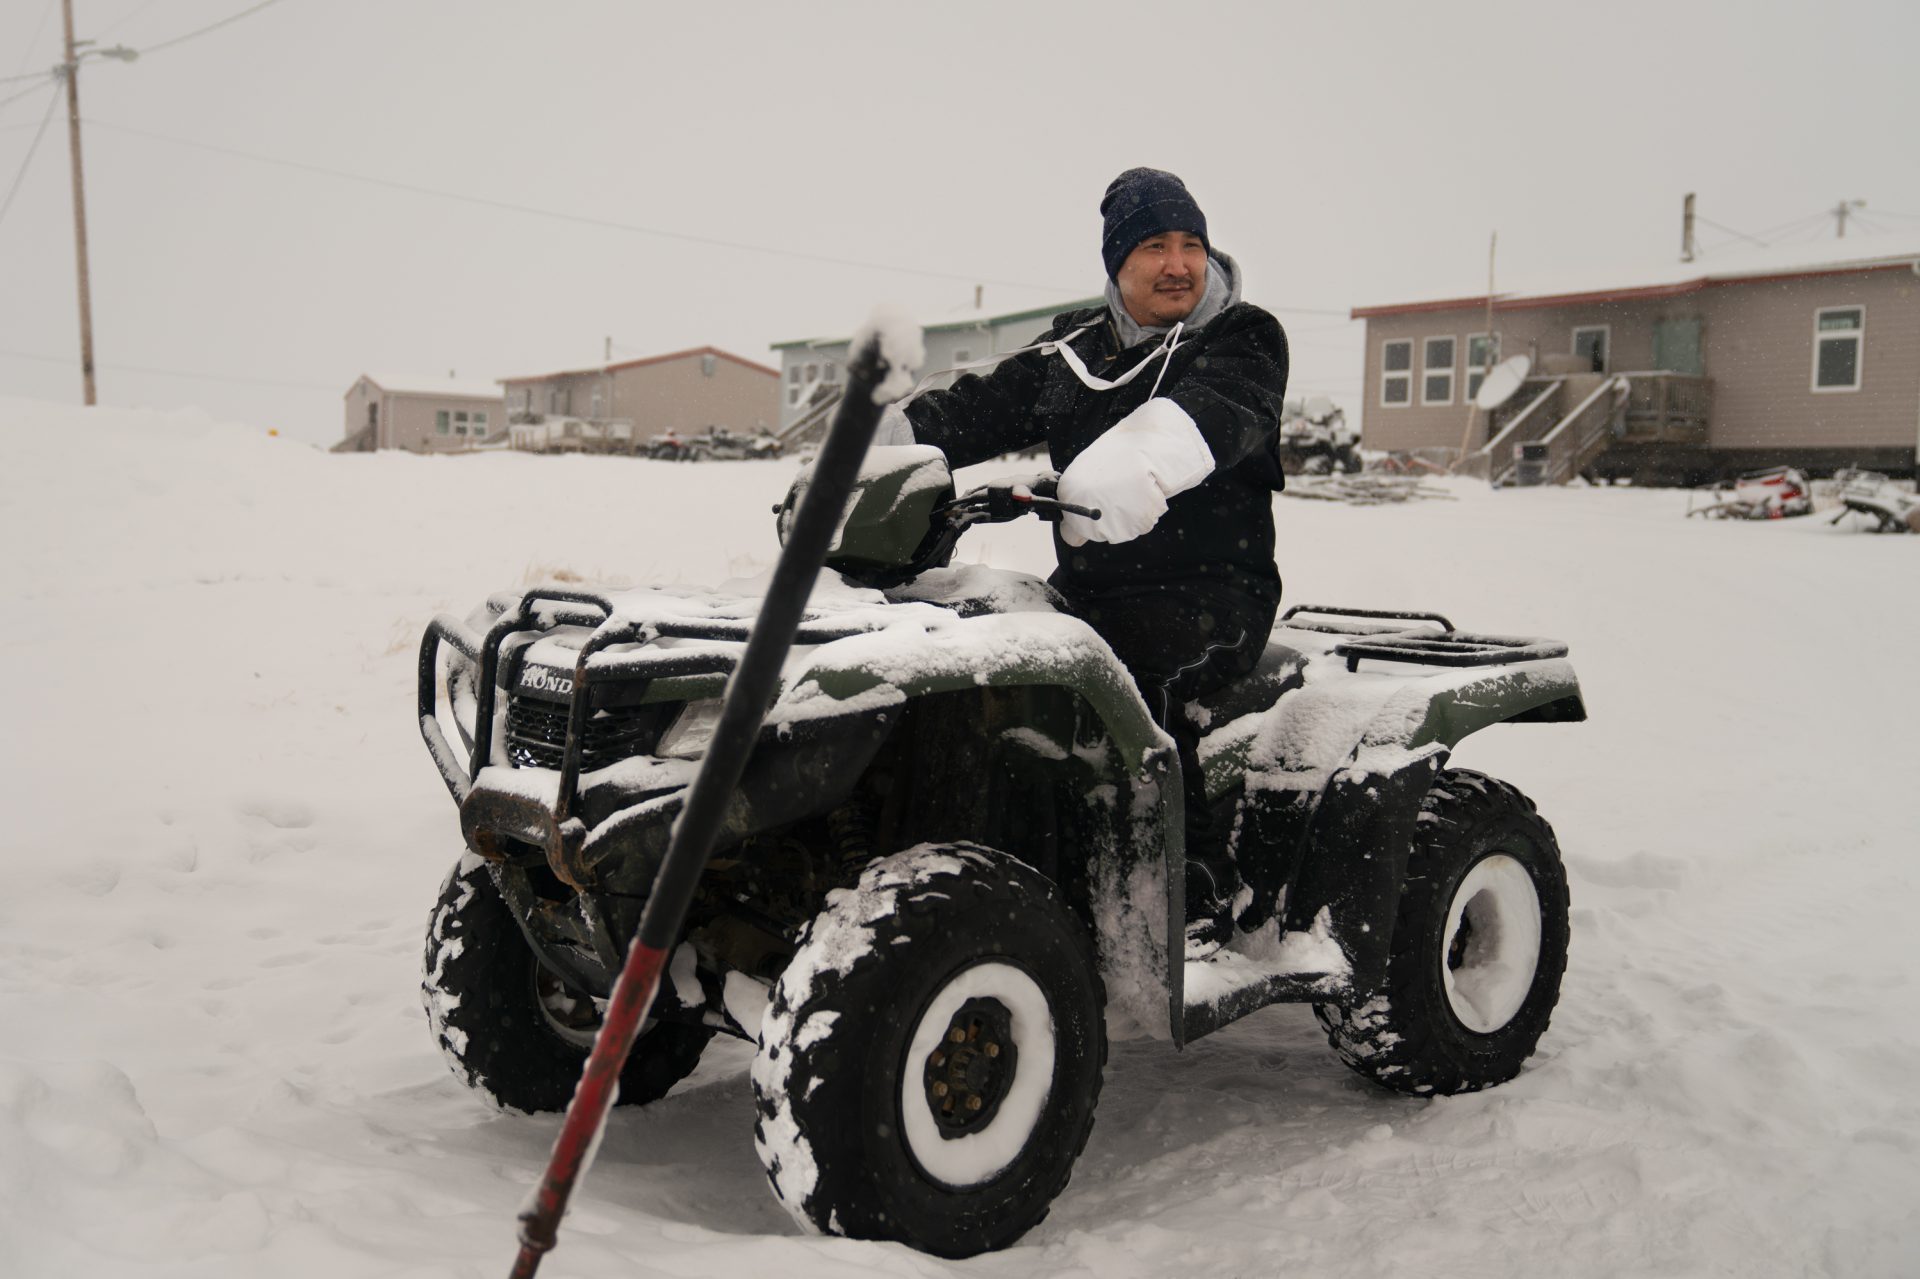 Noah Lincoln, a subsistence hunter and assistant coach for the local high school boys' basketball team, sits on his ATV outside his home in Toksook Bay.